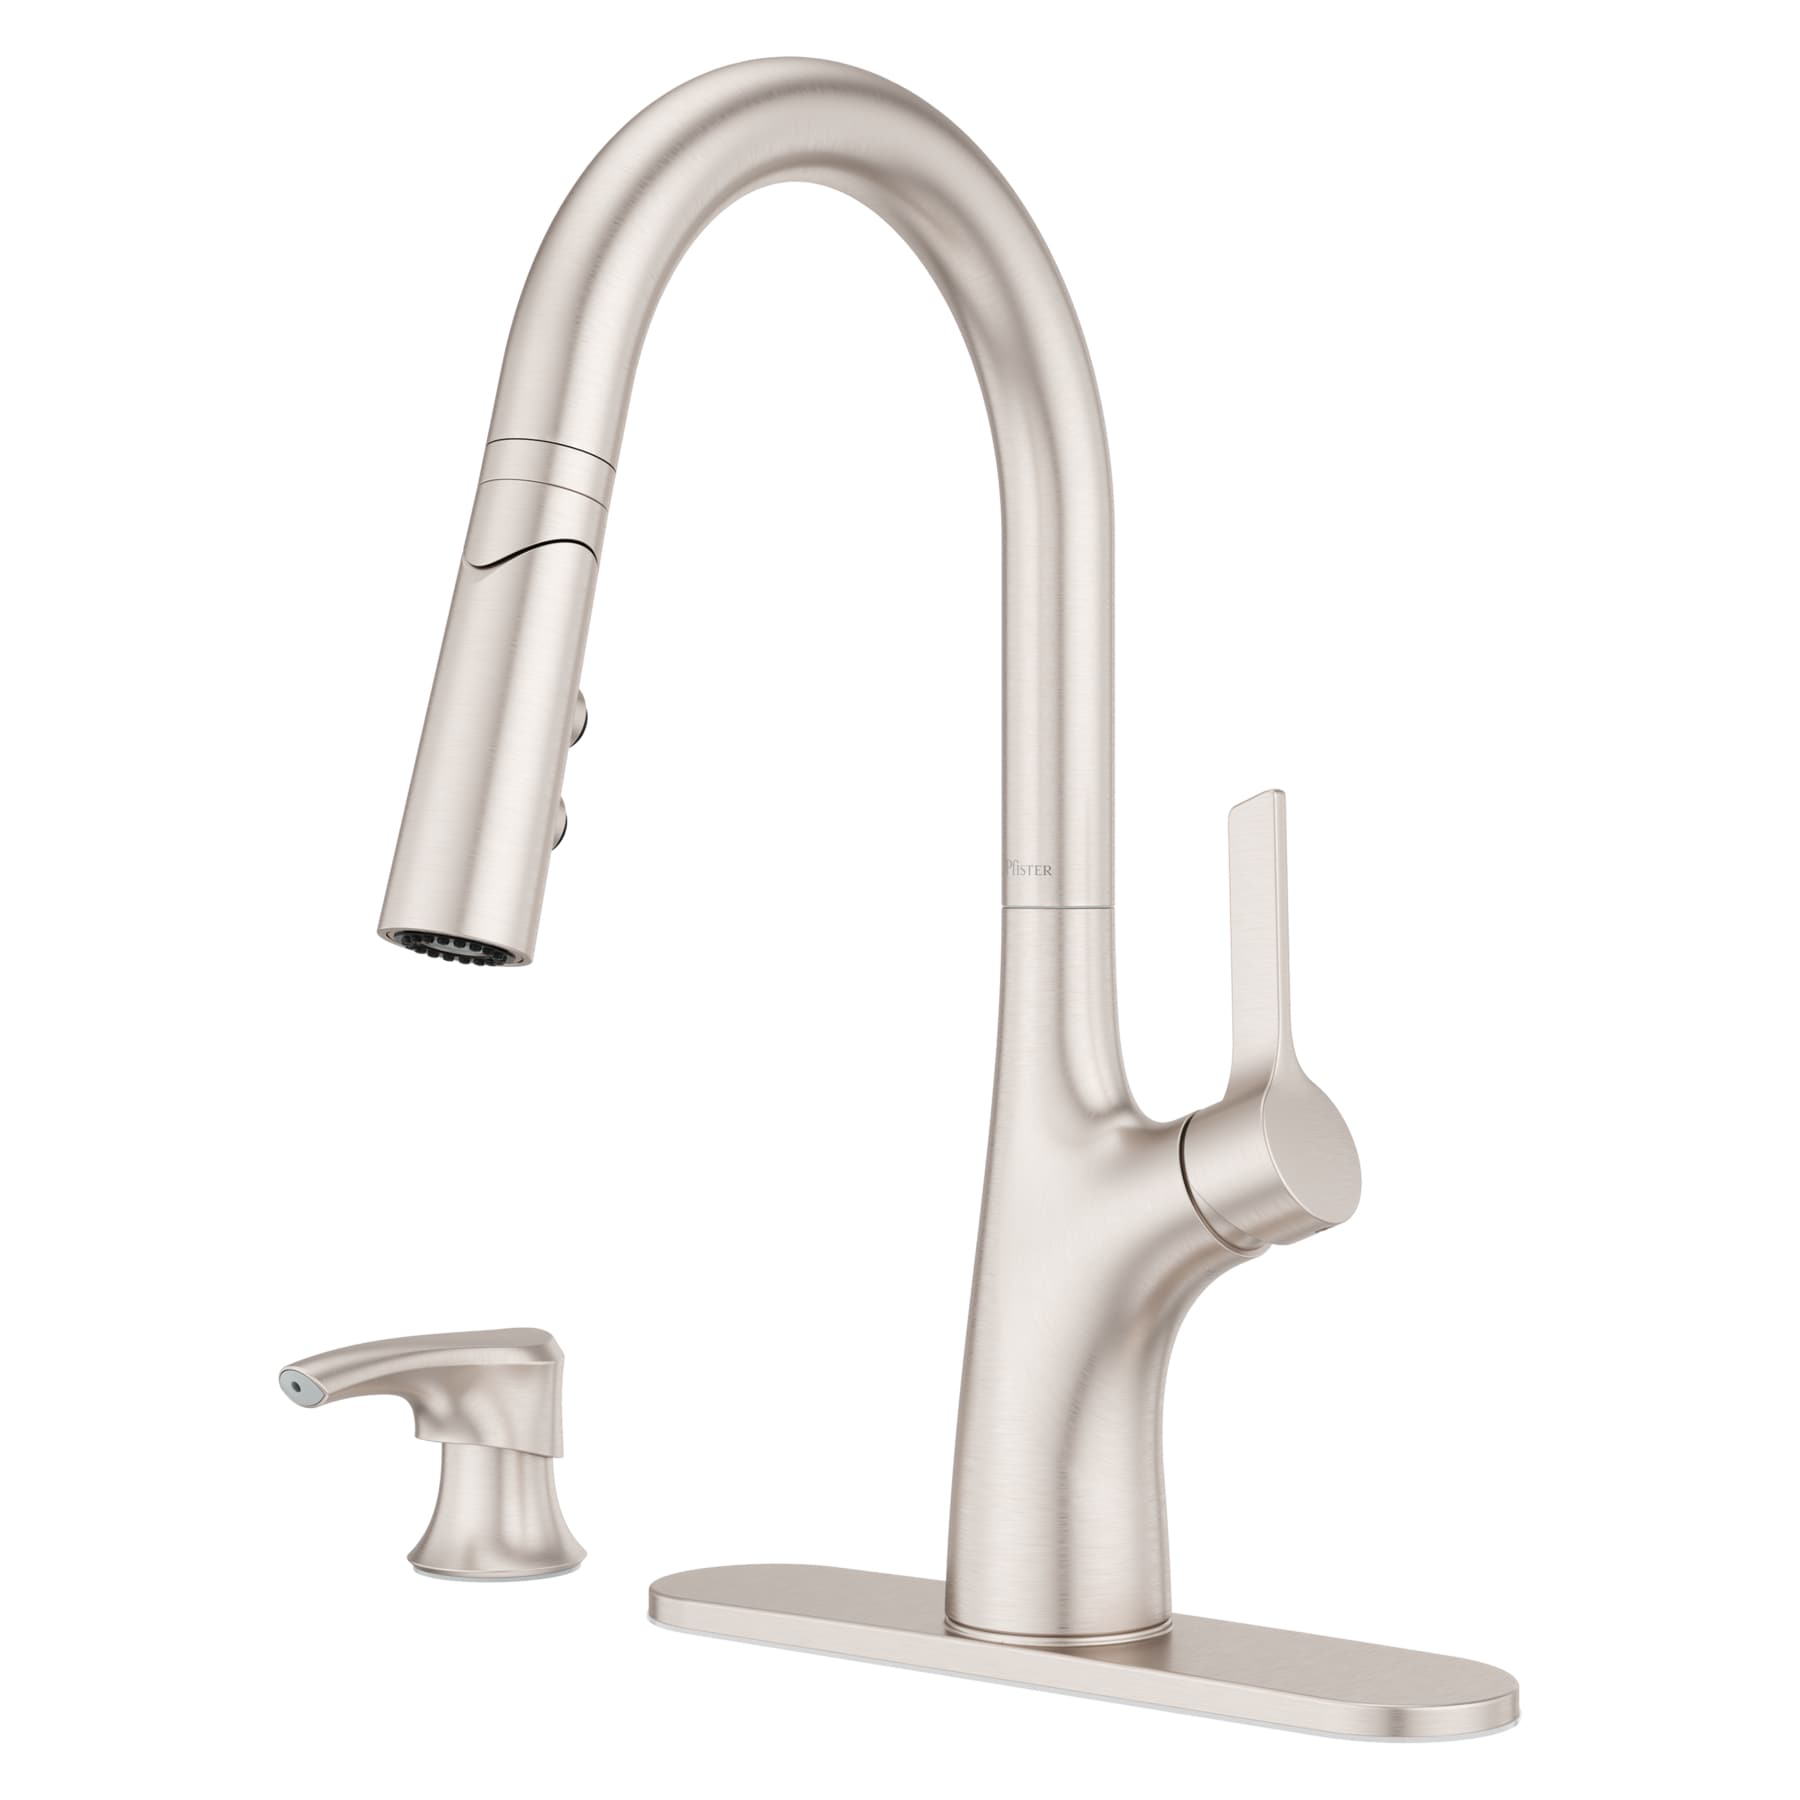 Ceylon Spot Defense Stainless Steel Single Handle Pull-down Kitchen Faucet with Deck Plate and Soap Dispenser Included | - Pfister F-529-7CLOGS